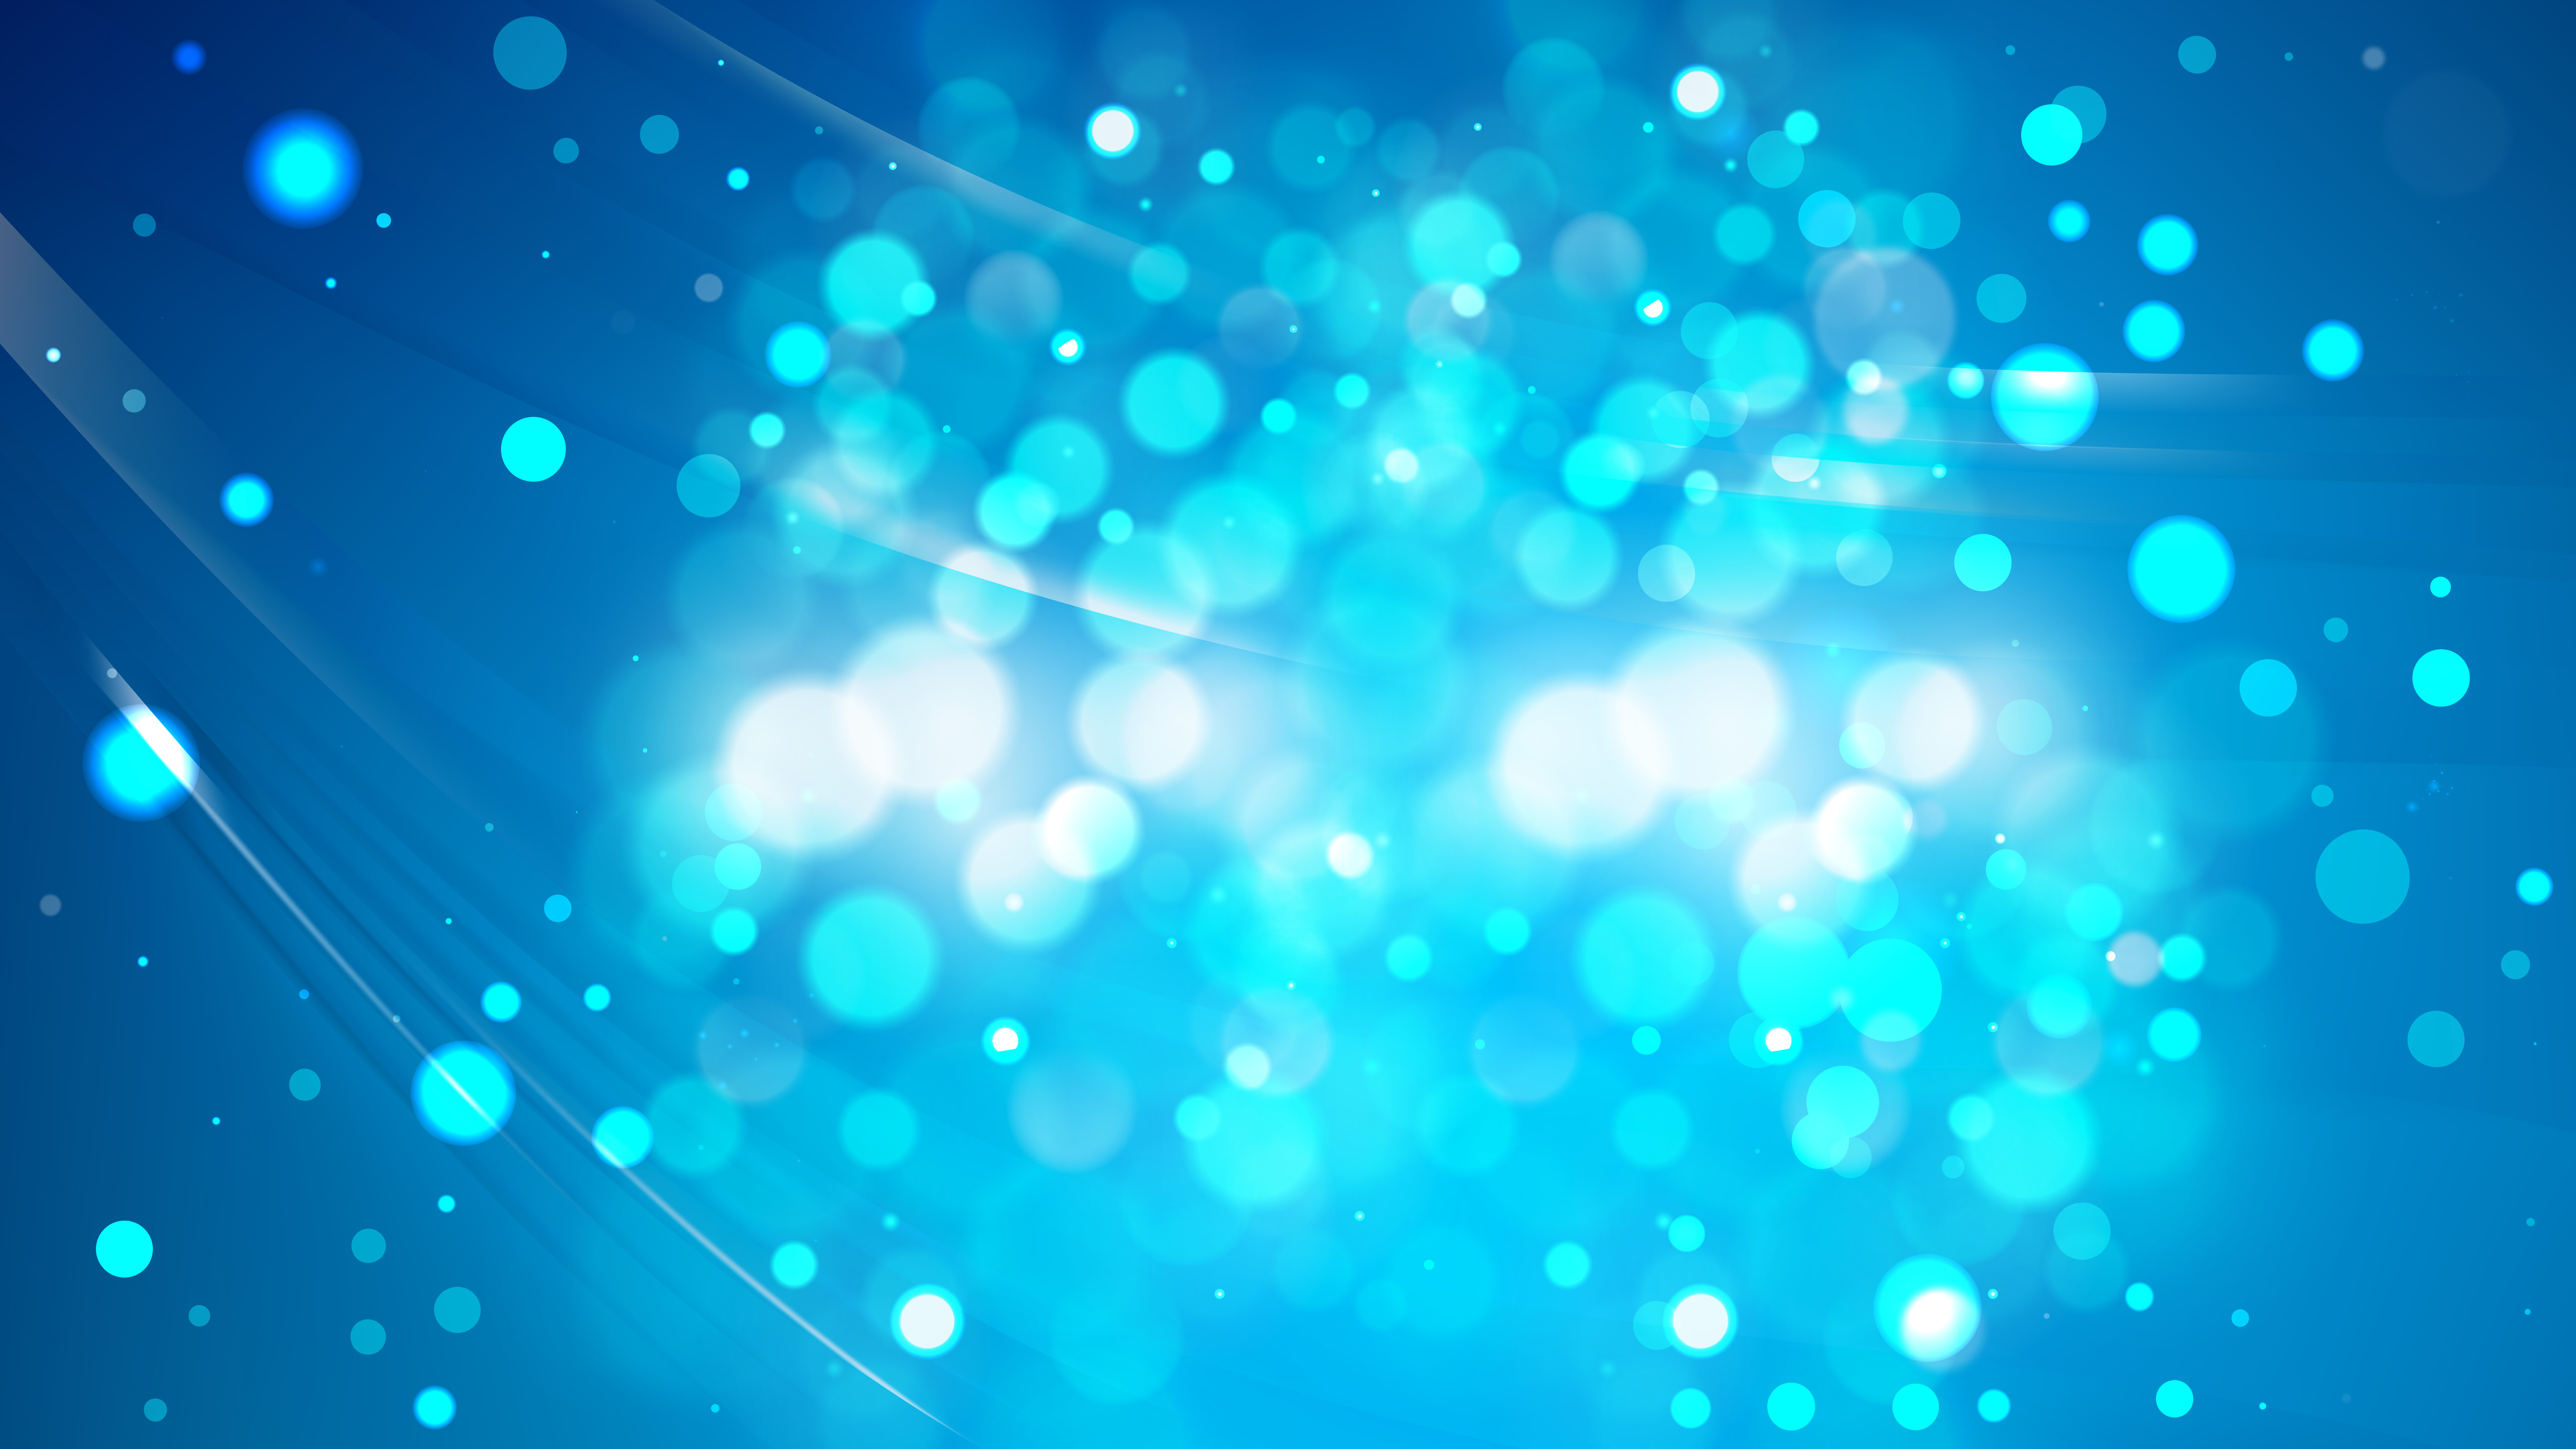 Abstract Bright Blue Defocused Background Image